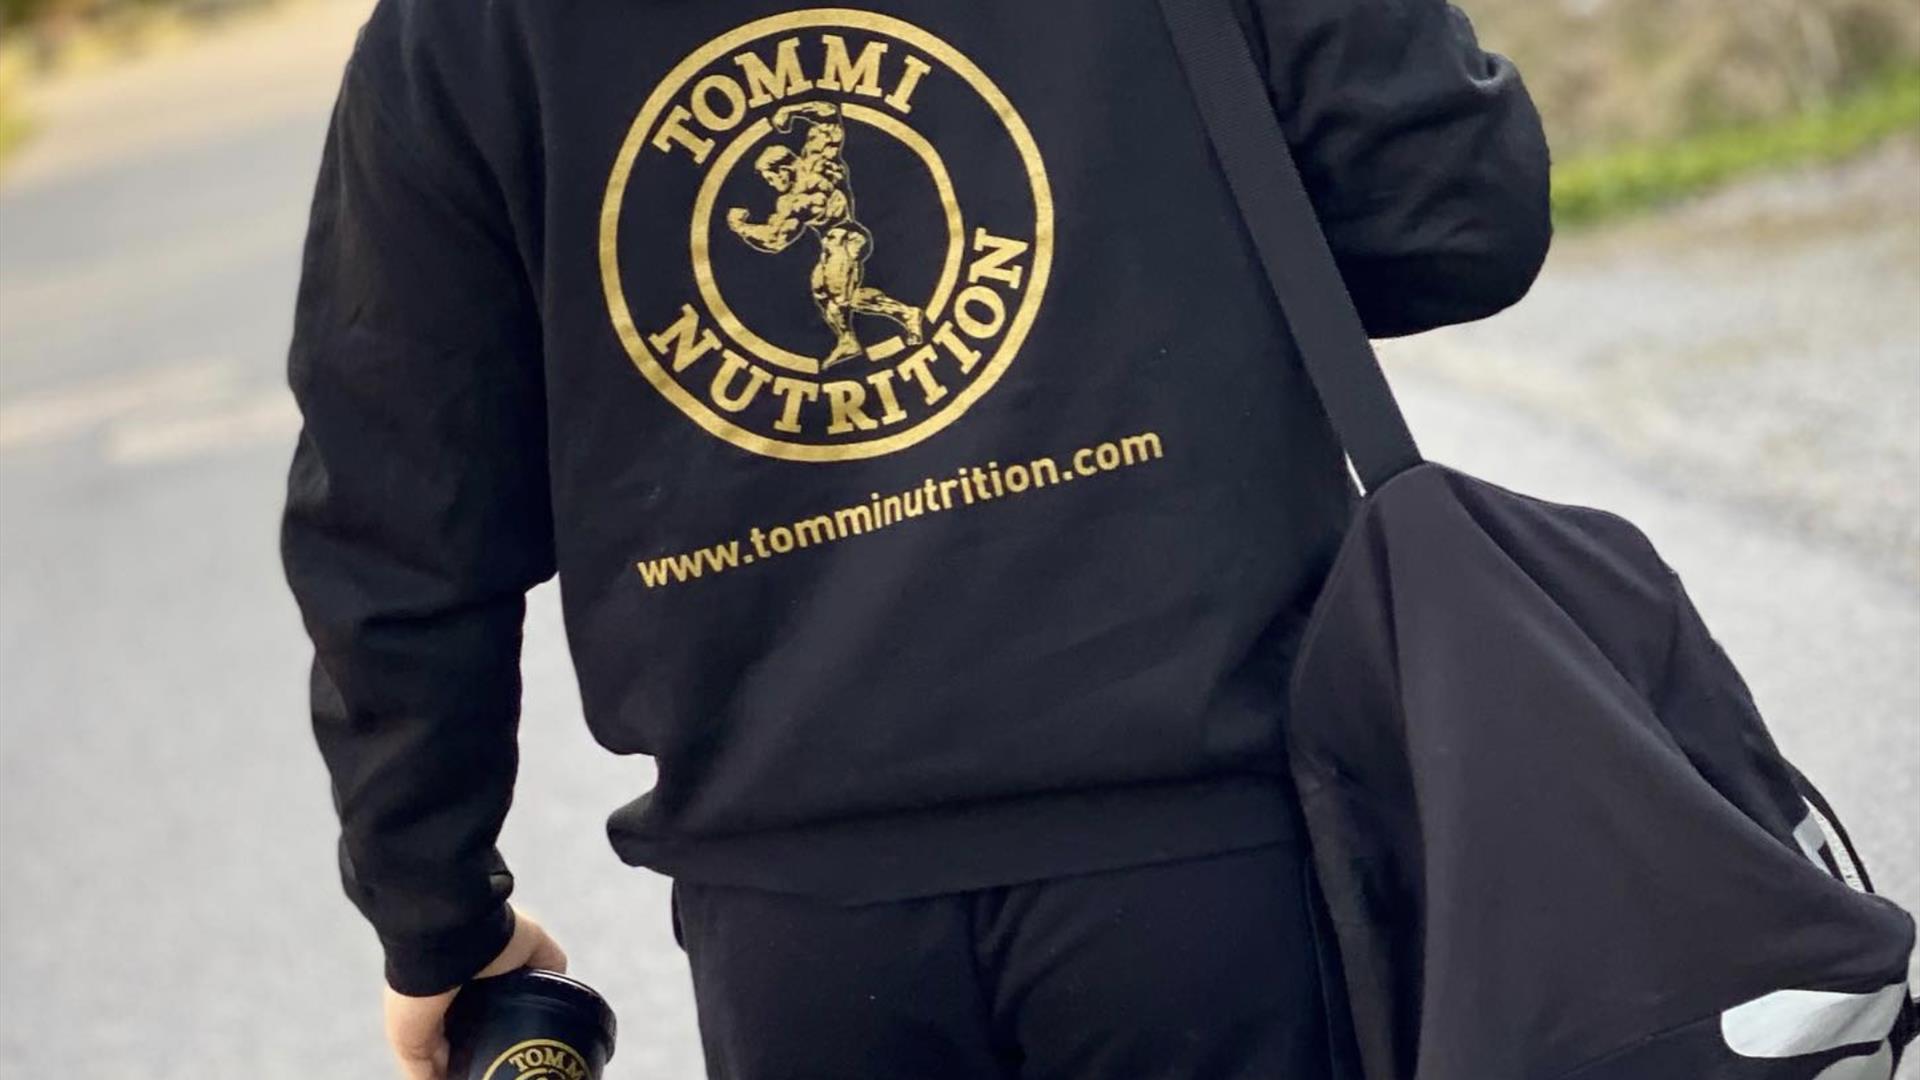 Tommi Nutrition